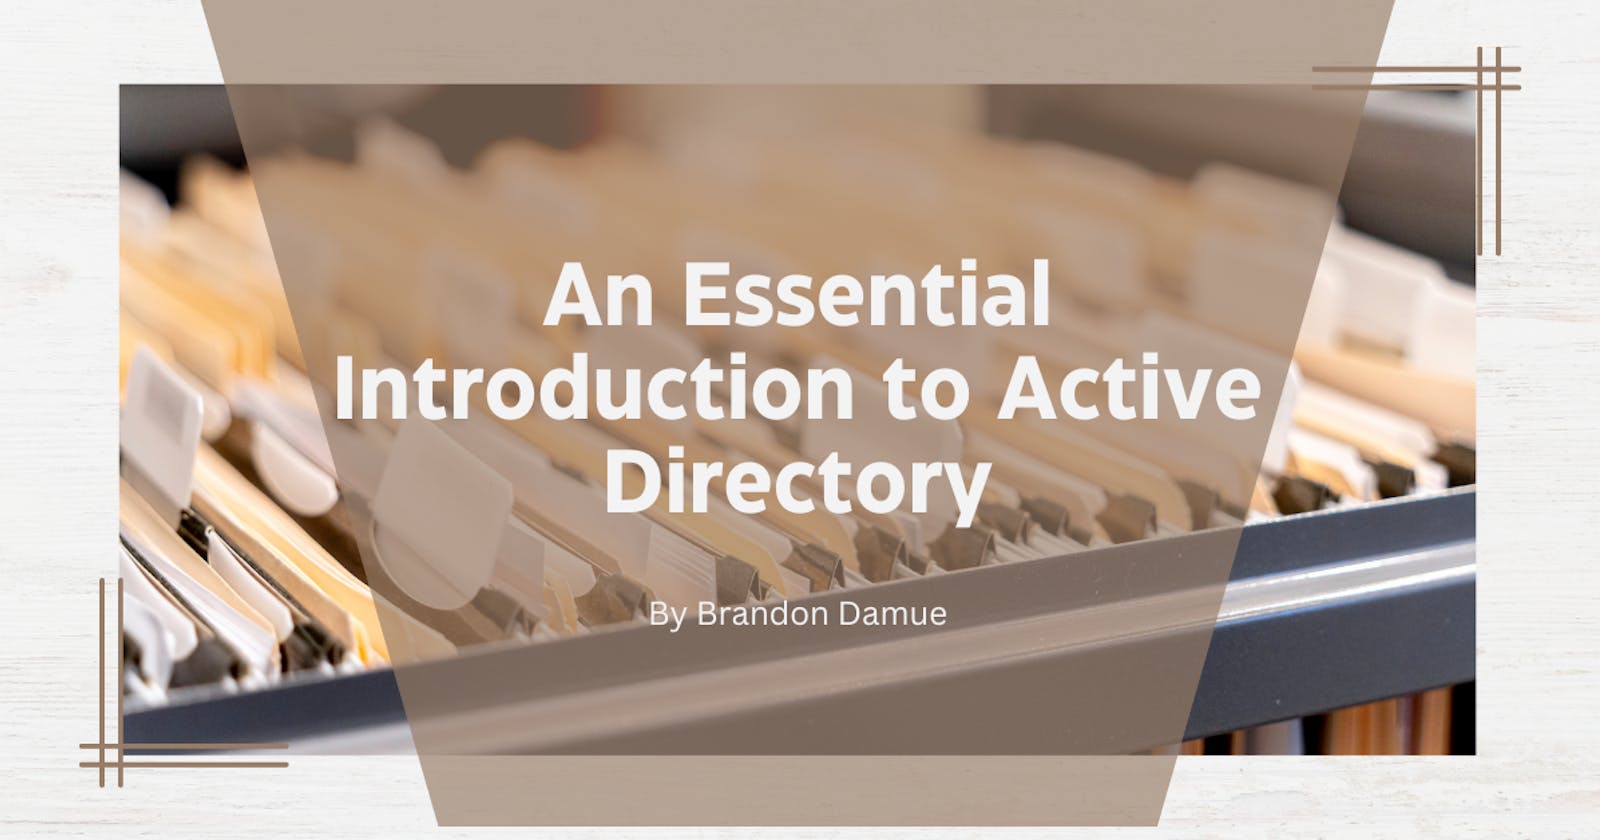 An Essential Introduction to Active Directory